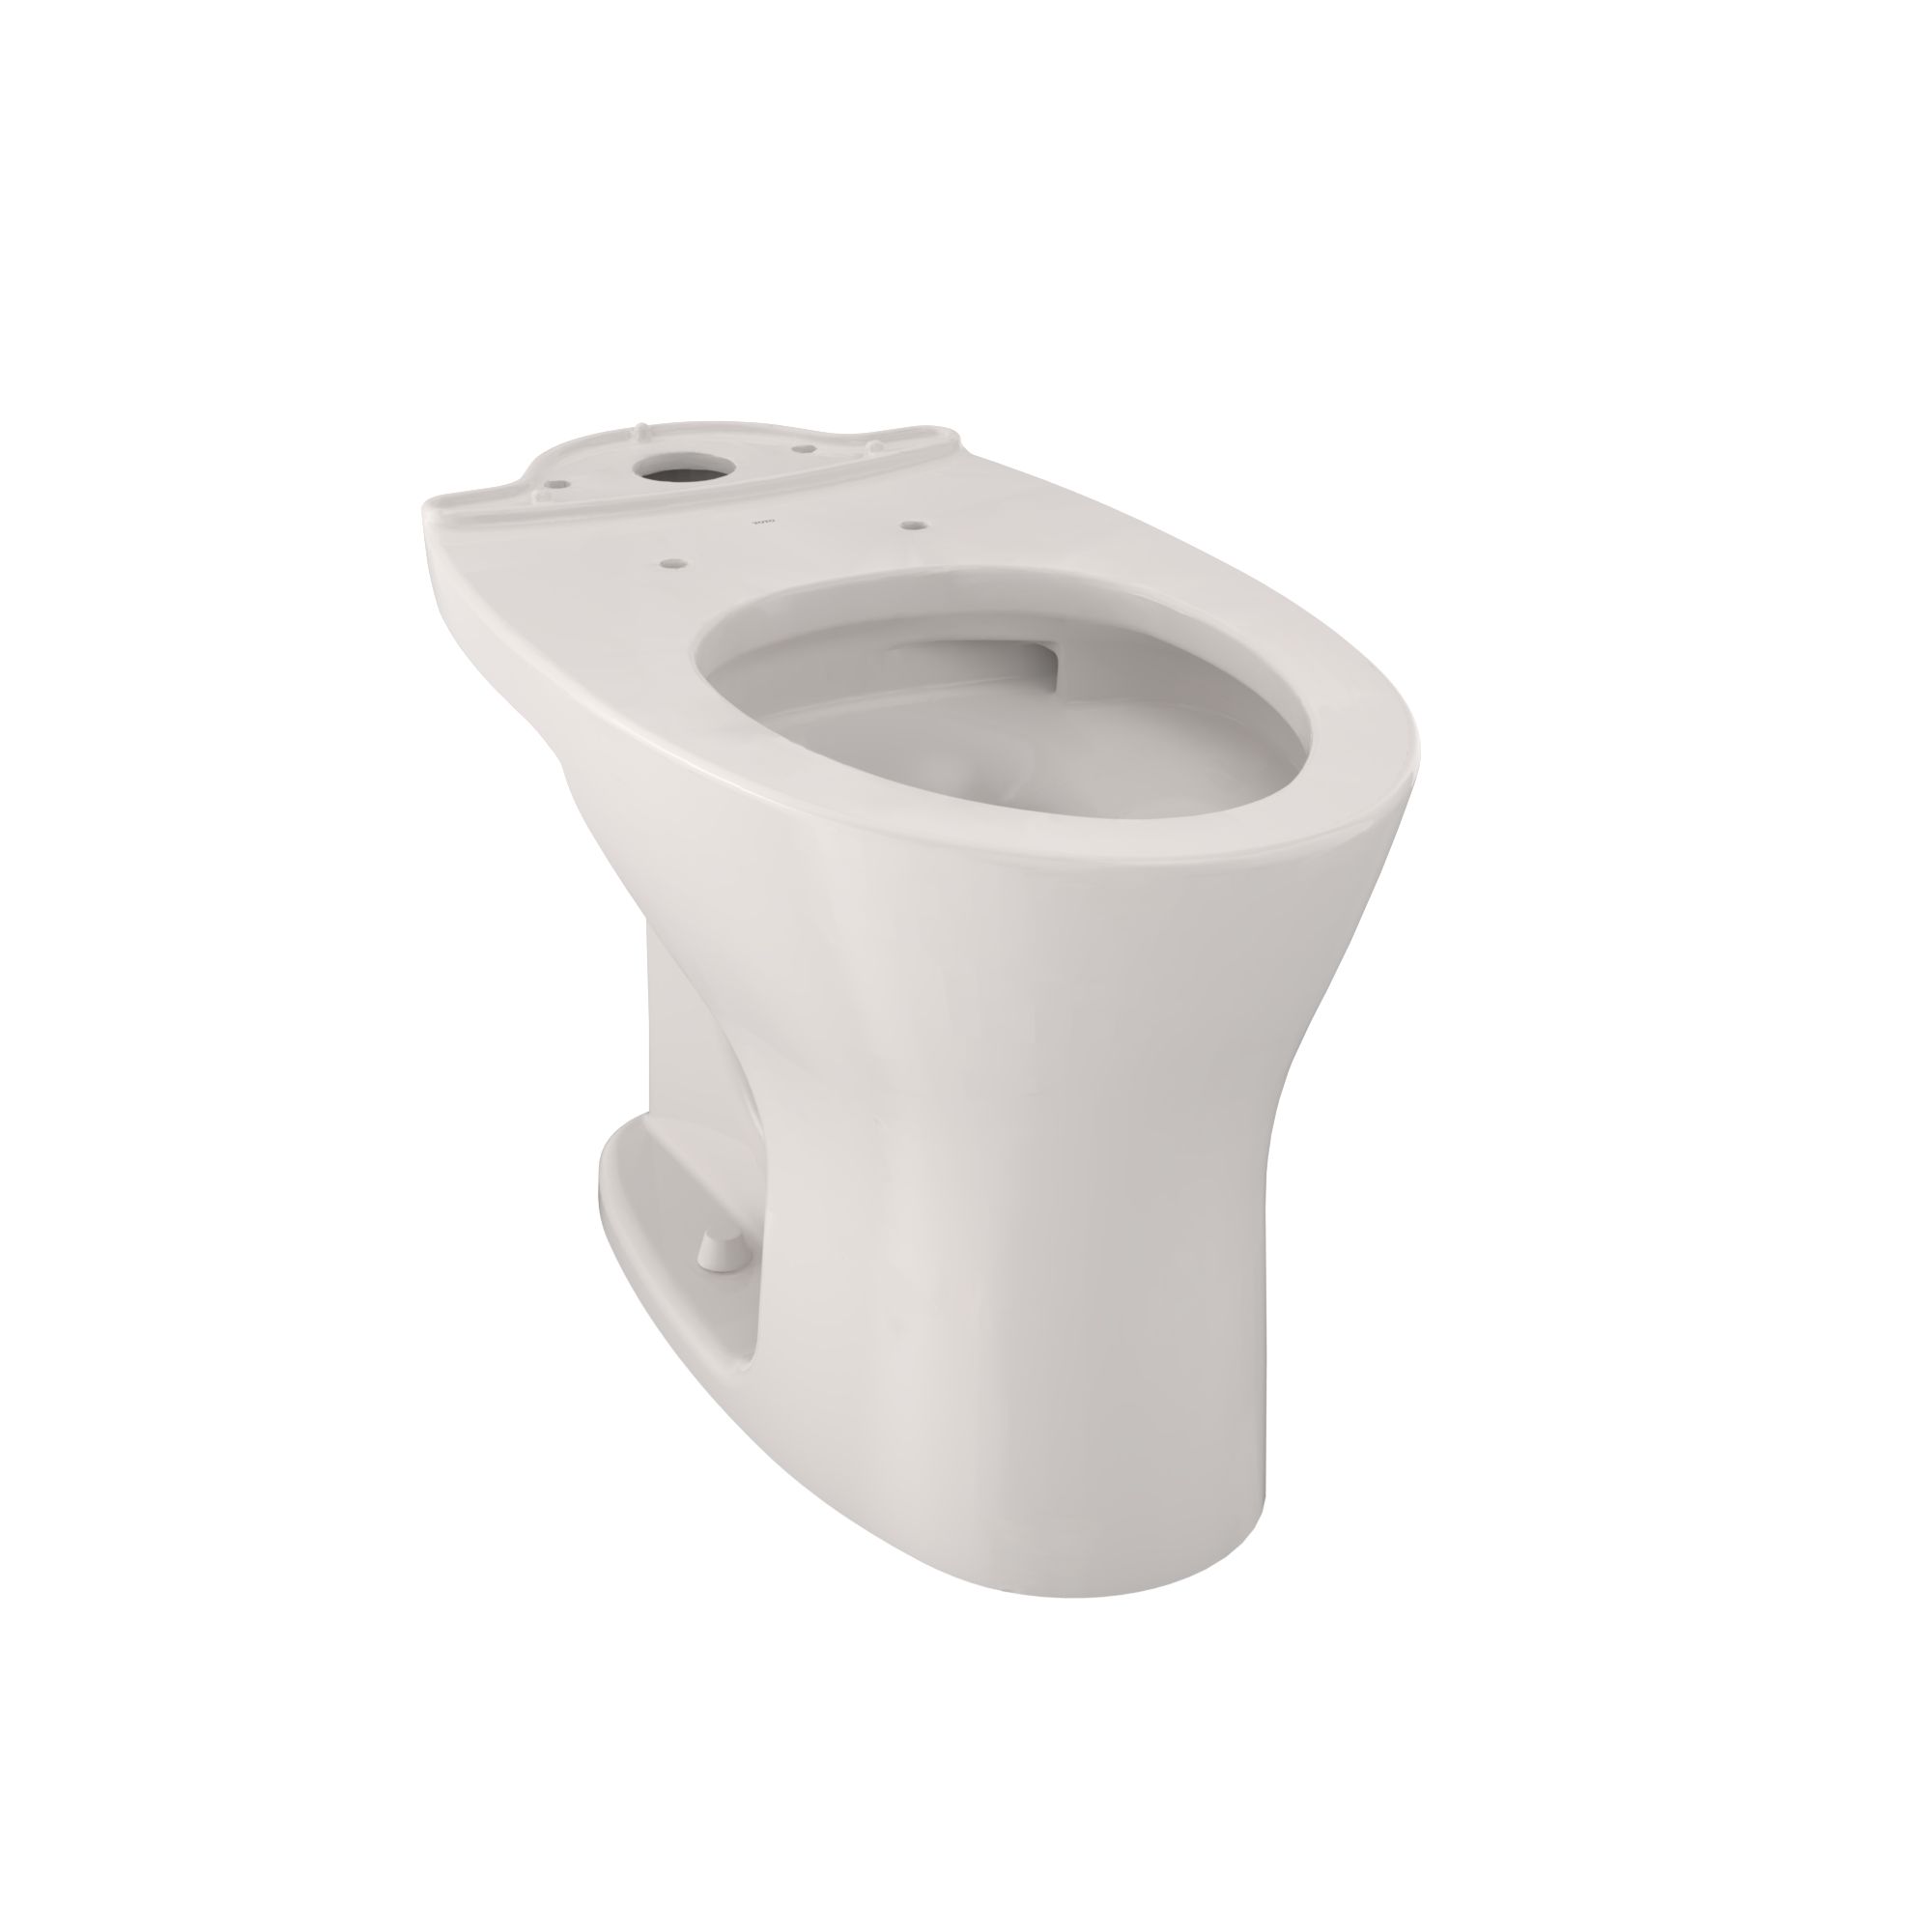 Cotton White Toto CST746CEMG#01 Drake Two-Piece Elongated Dual Flush 1.28 and 0.8 GPF DYNAMAX Tornado Flush Toilet with CEFIONTECT